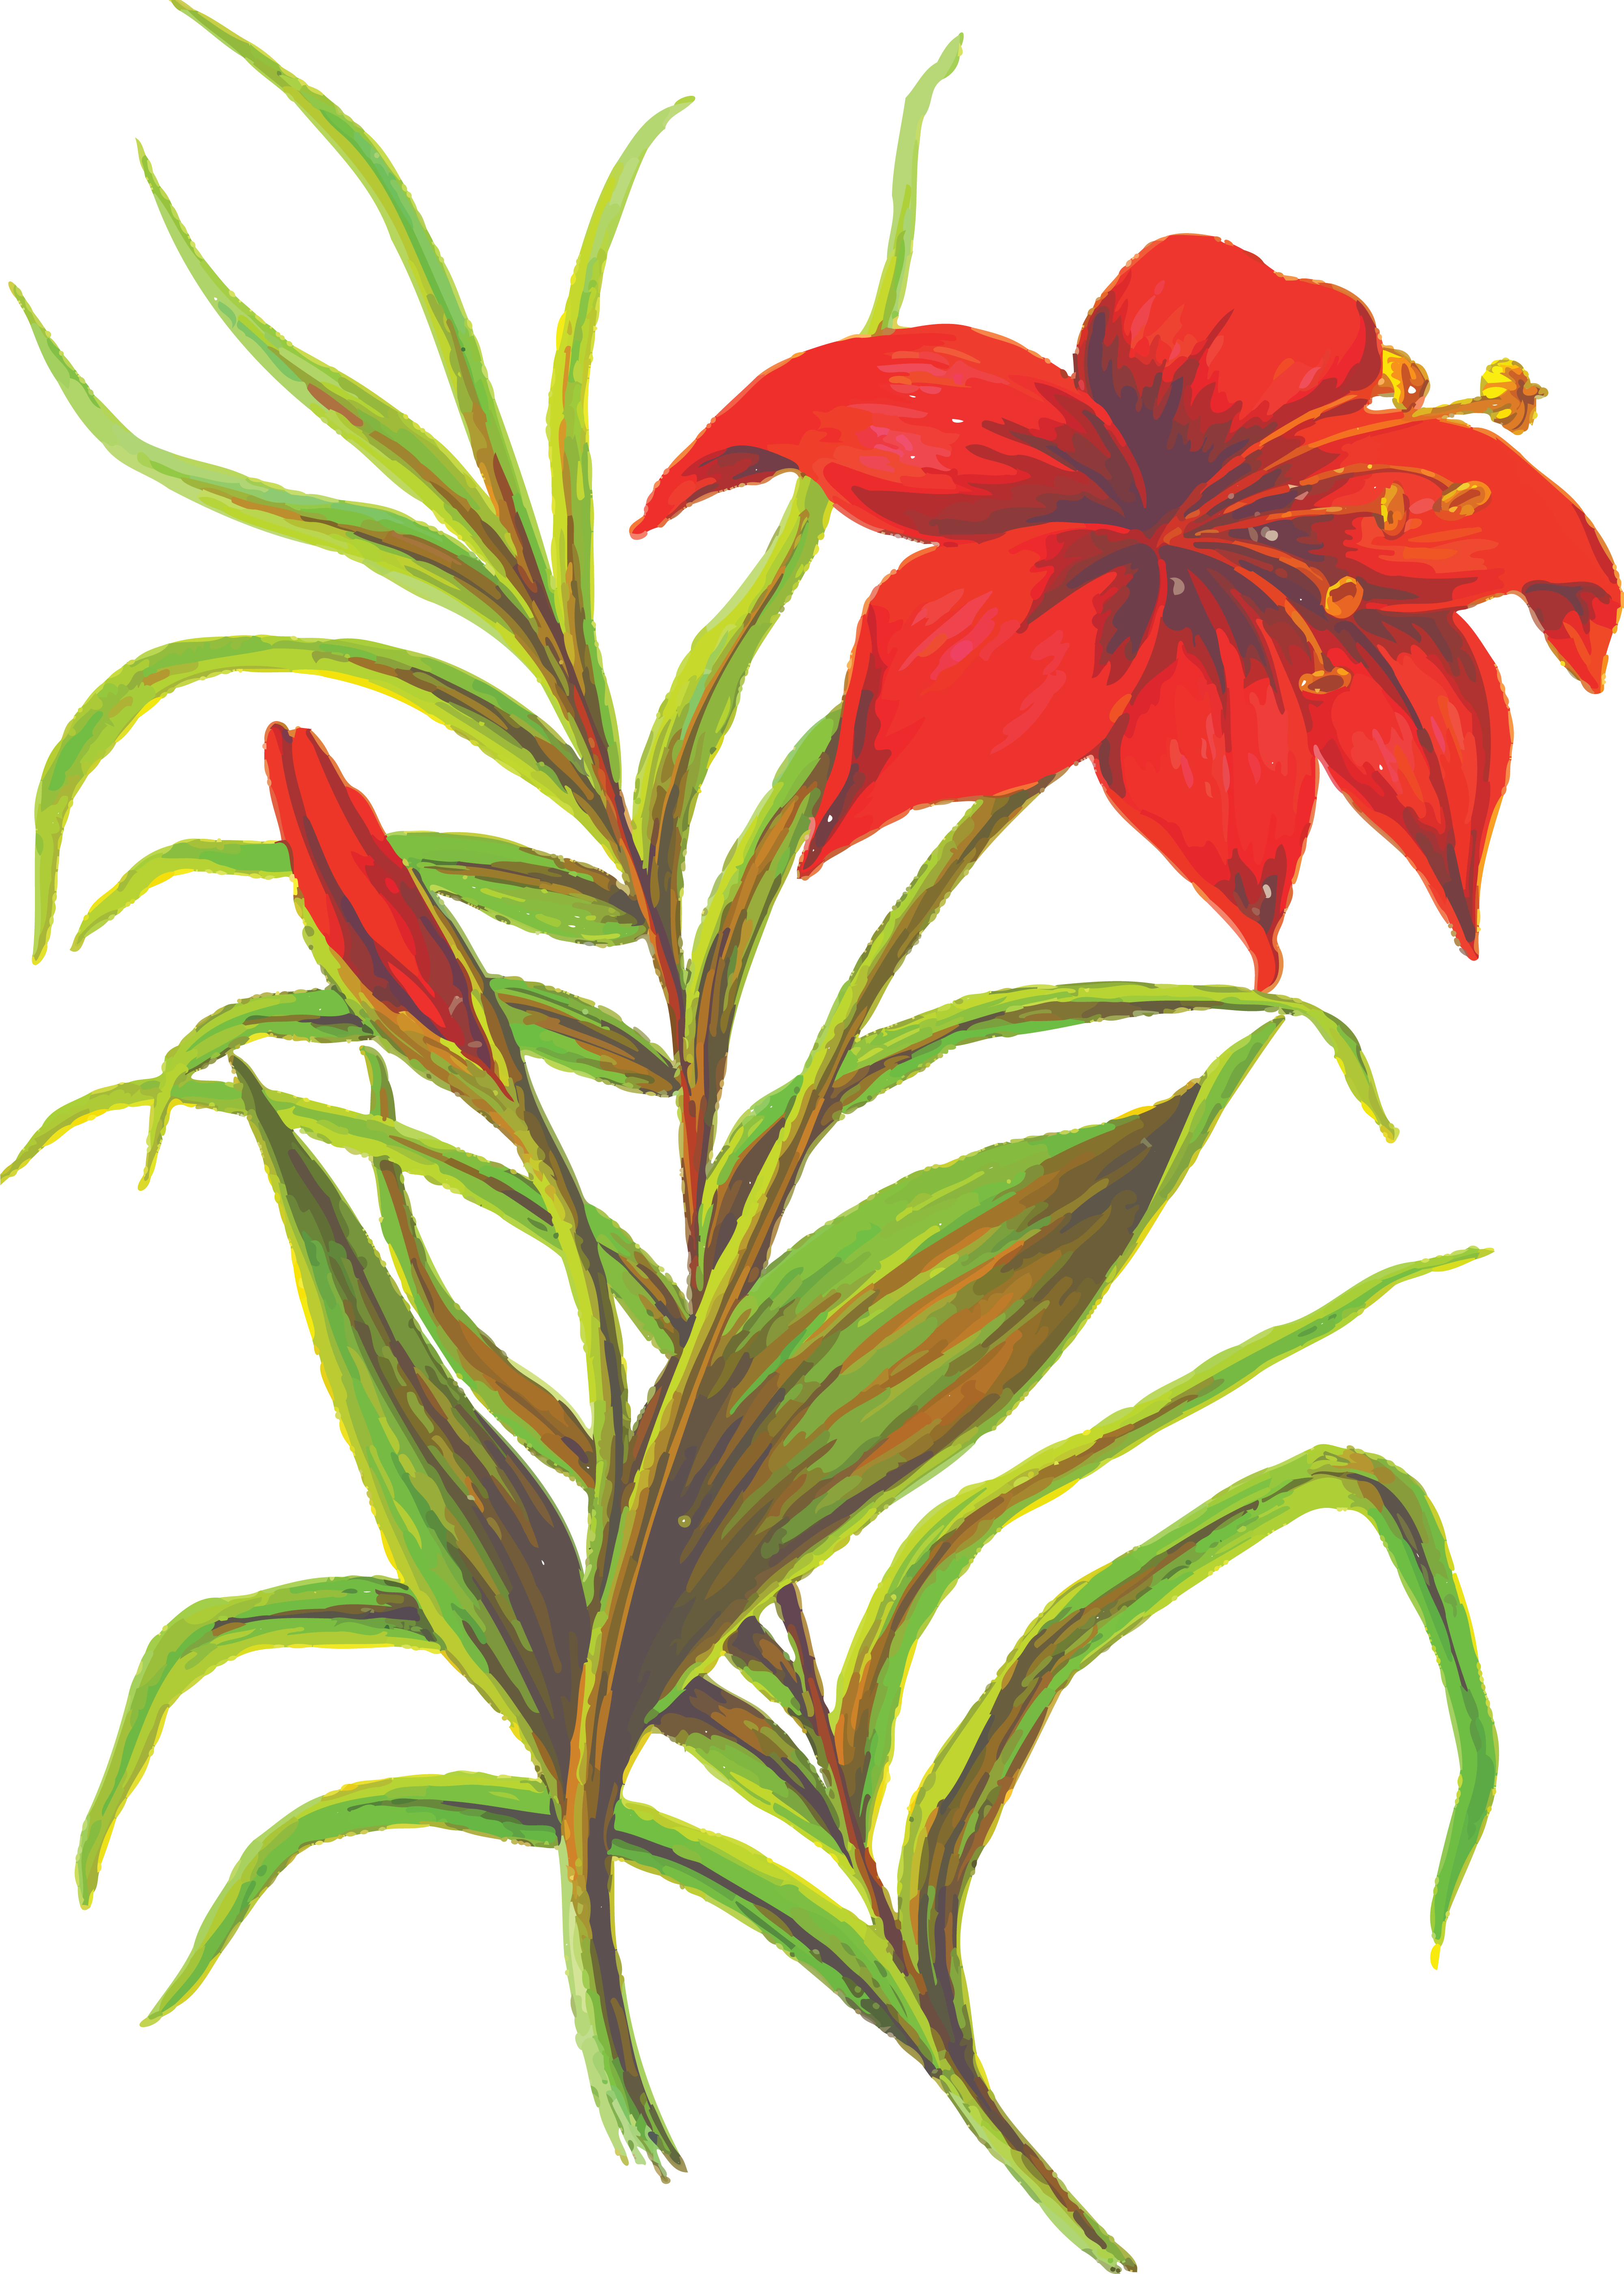 Free Clipart Of A lily plant